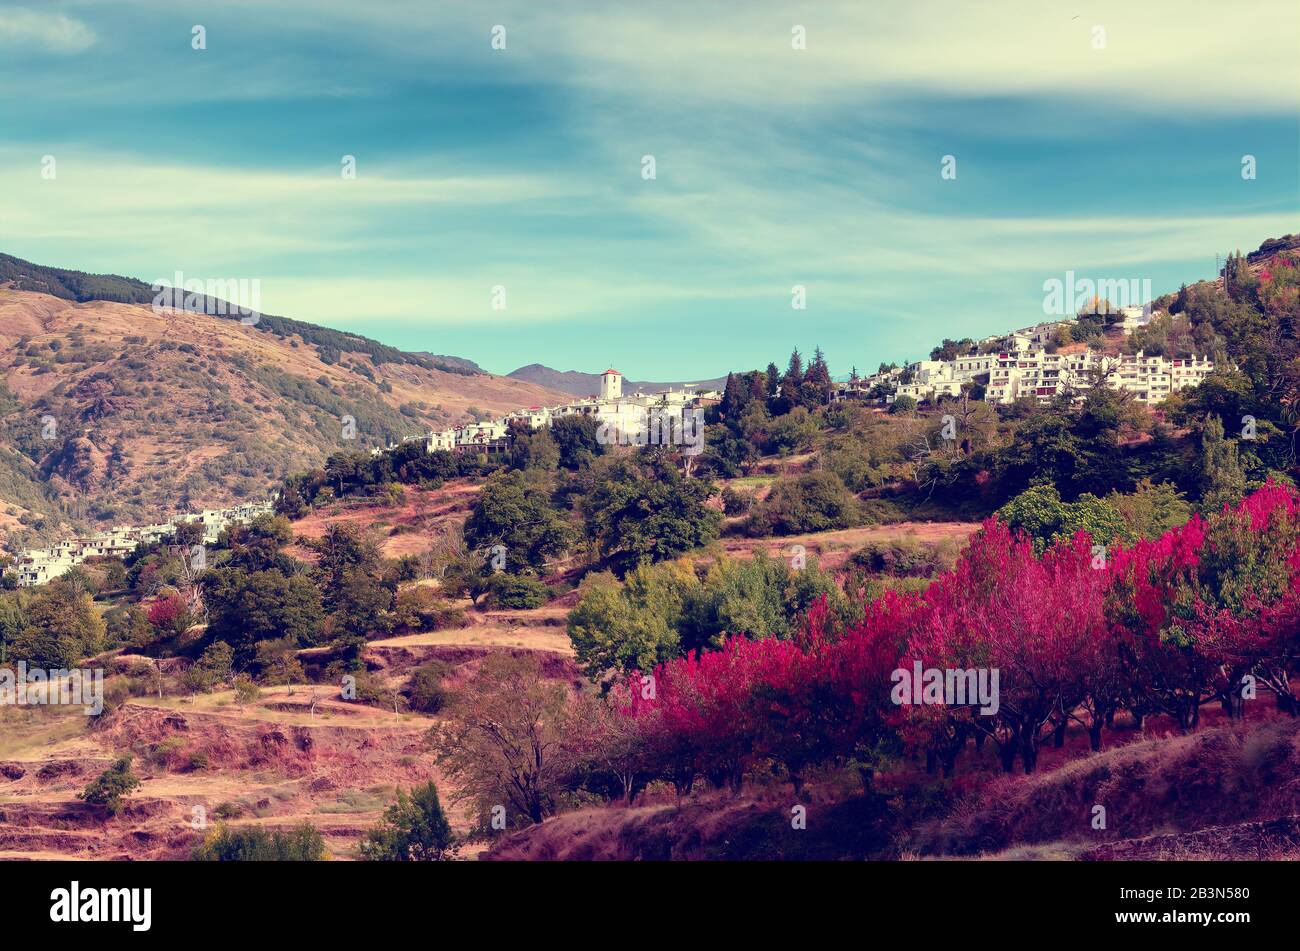 The mountain village of capileira perched on a ridge in the alpujarras mountains, trees stained with autumn colours in the foreground Stock Photo